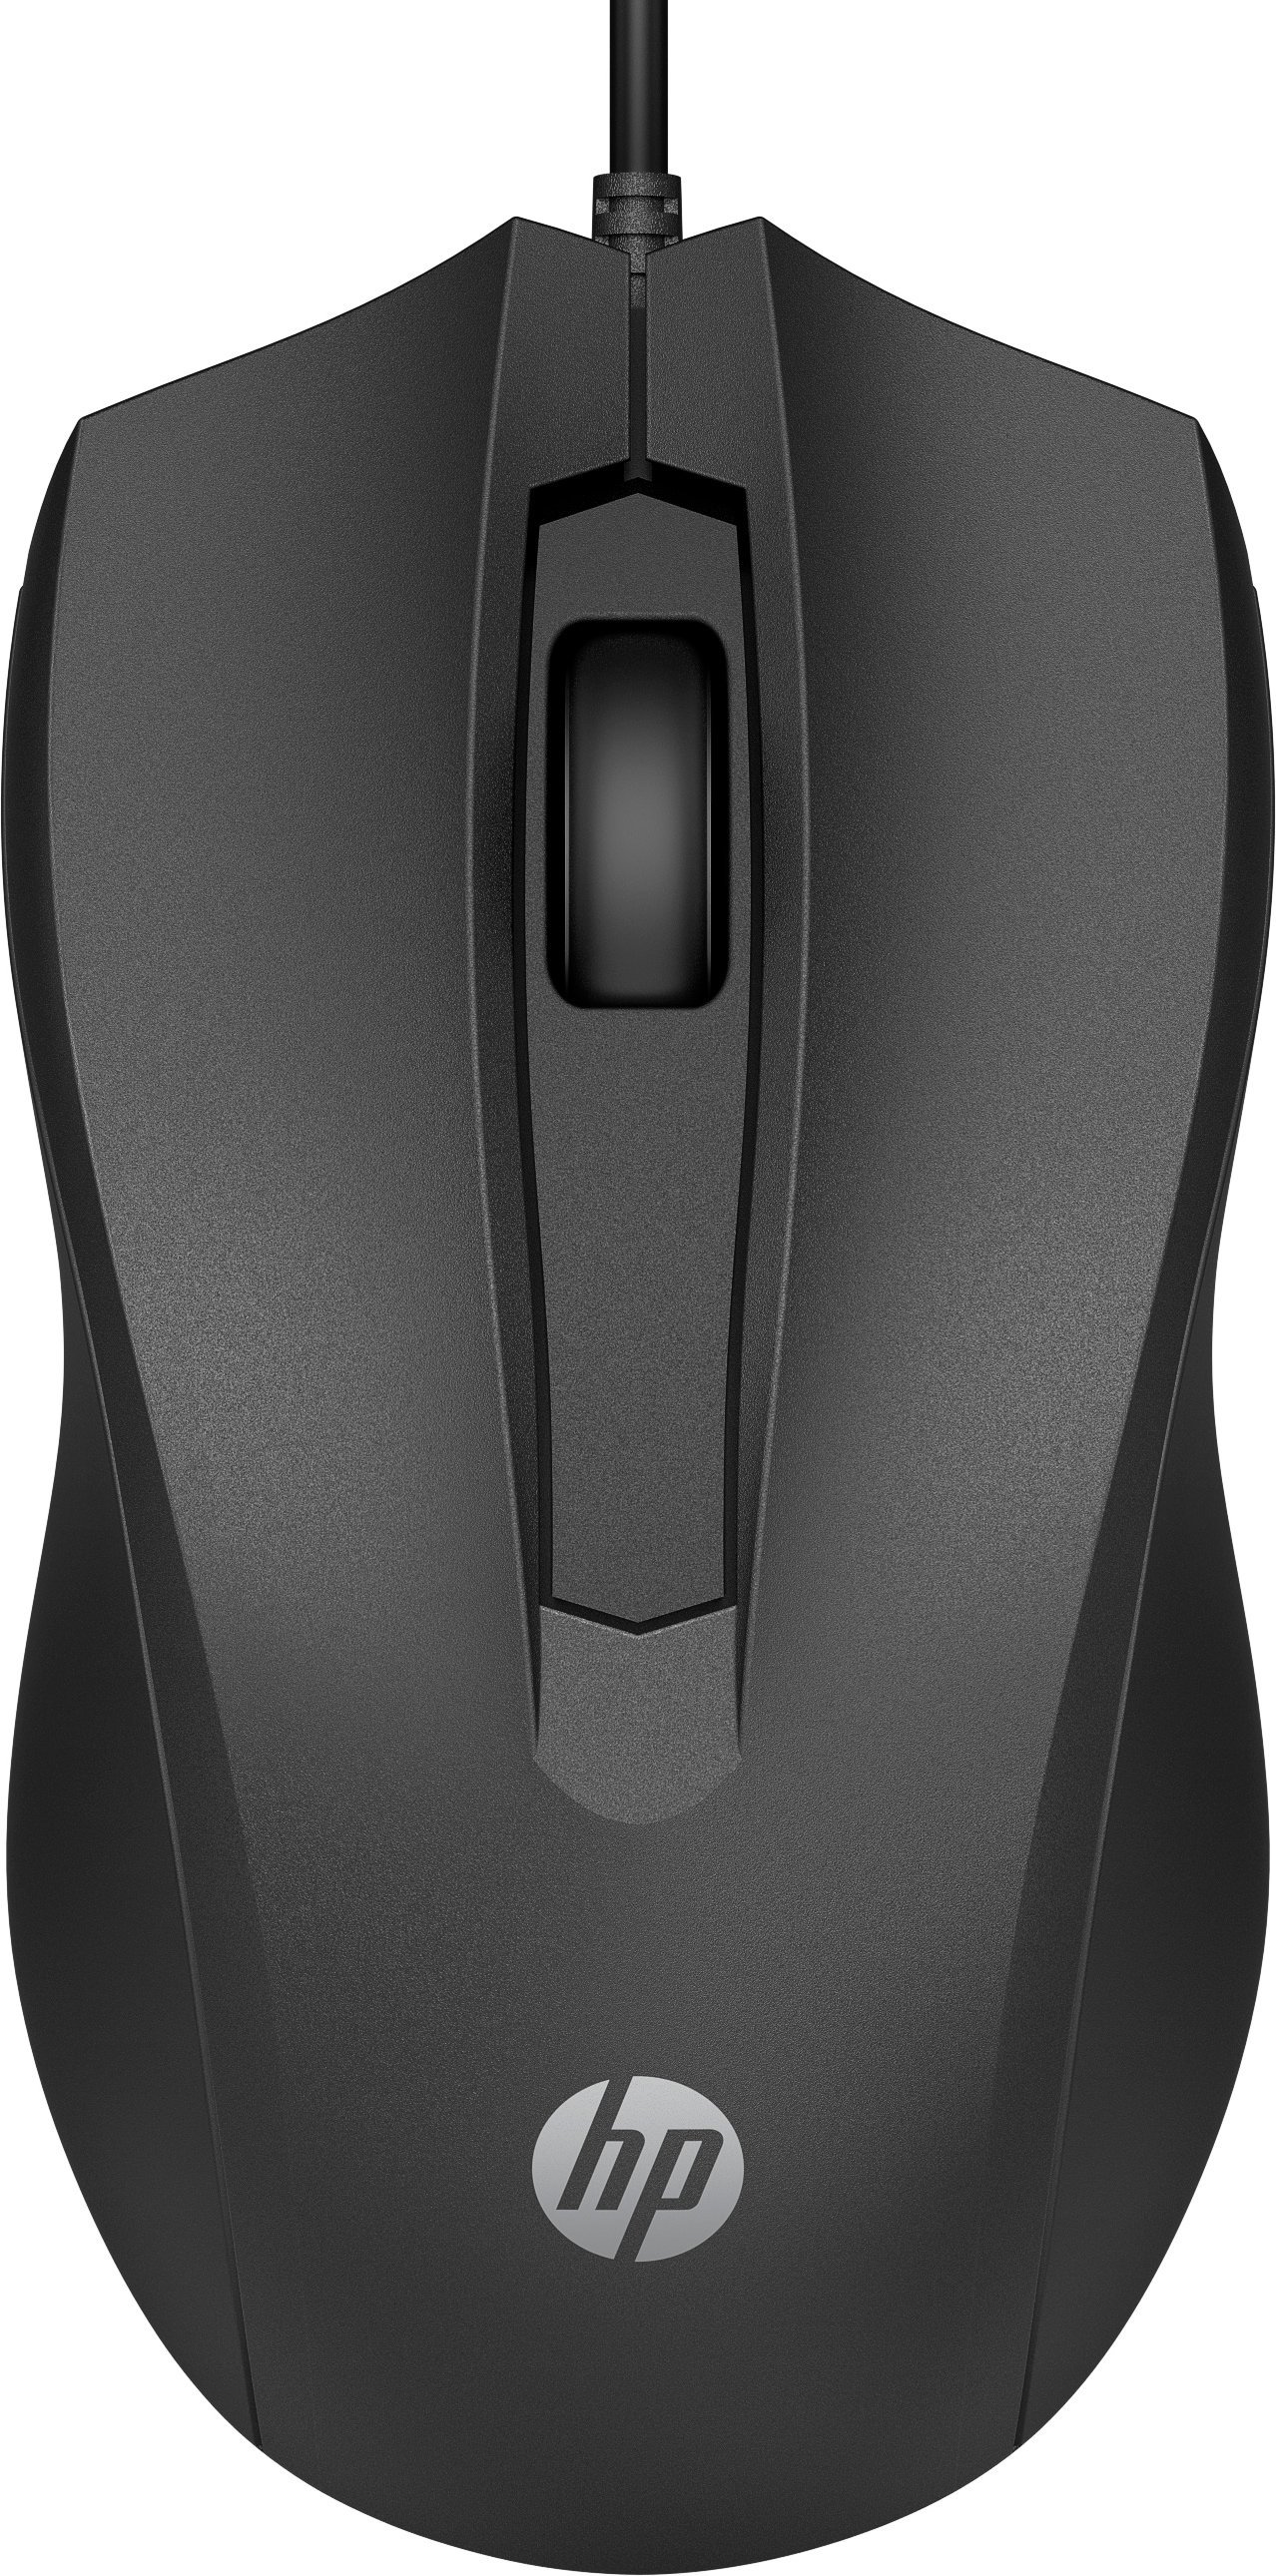 HP Mouse 6VY96AA / 6VY96AA#ABB Nero